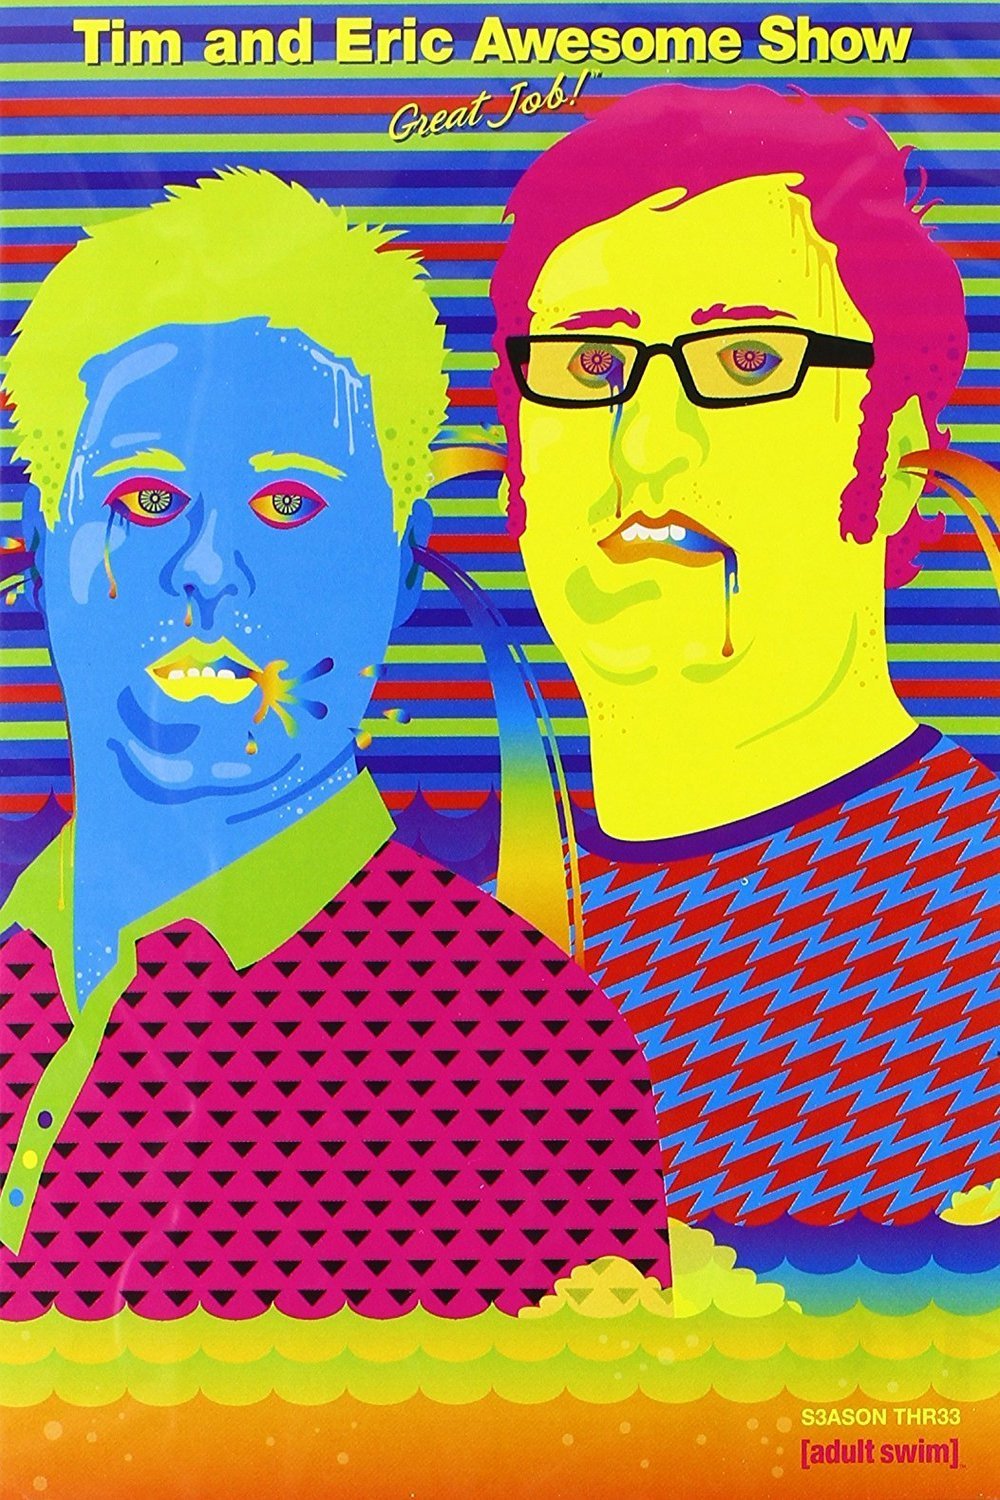 Poster of the movie Tim and Eric Awesome Show: Great Job!